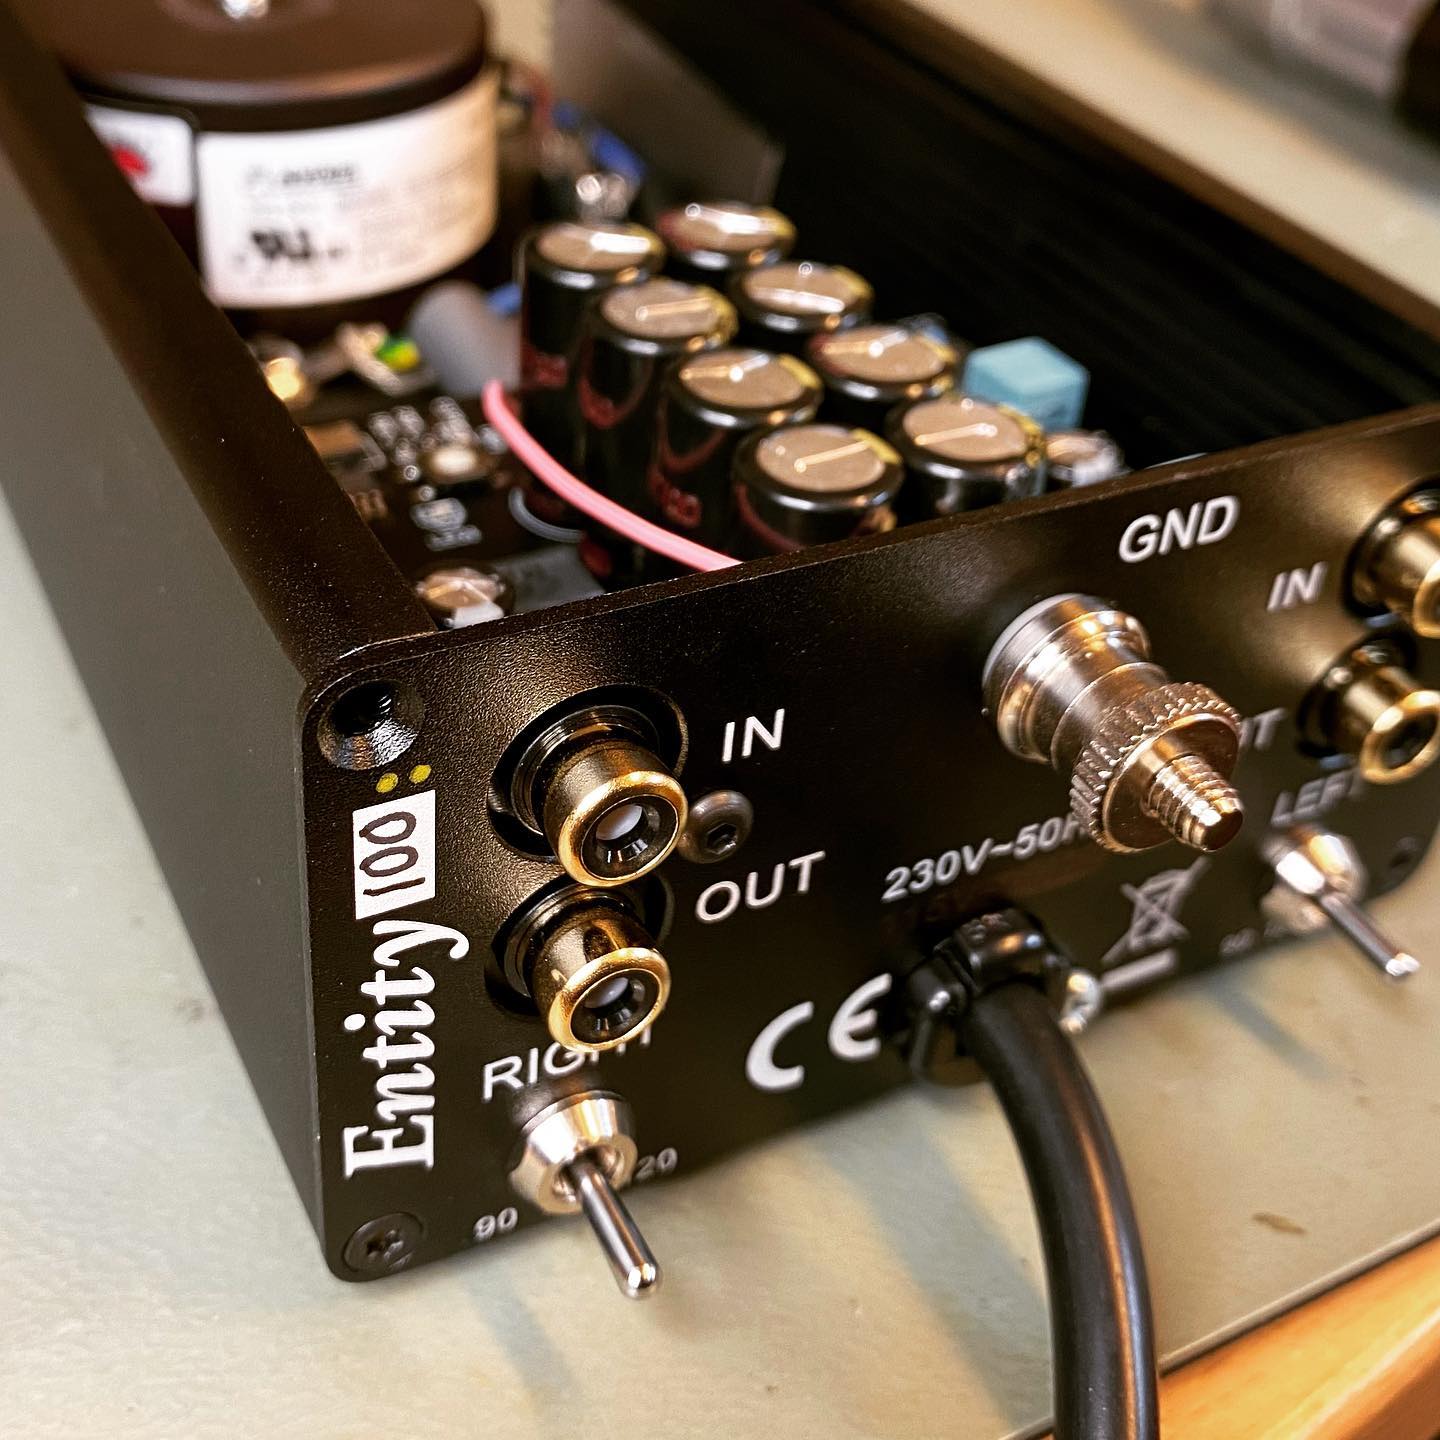 Moving Coil phono stage Entity 1.2 number 100 being finalised before it’s shipped to Gothenburg tomorrow. Difficult to grasp that I’ve actually built one hundred of these!